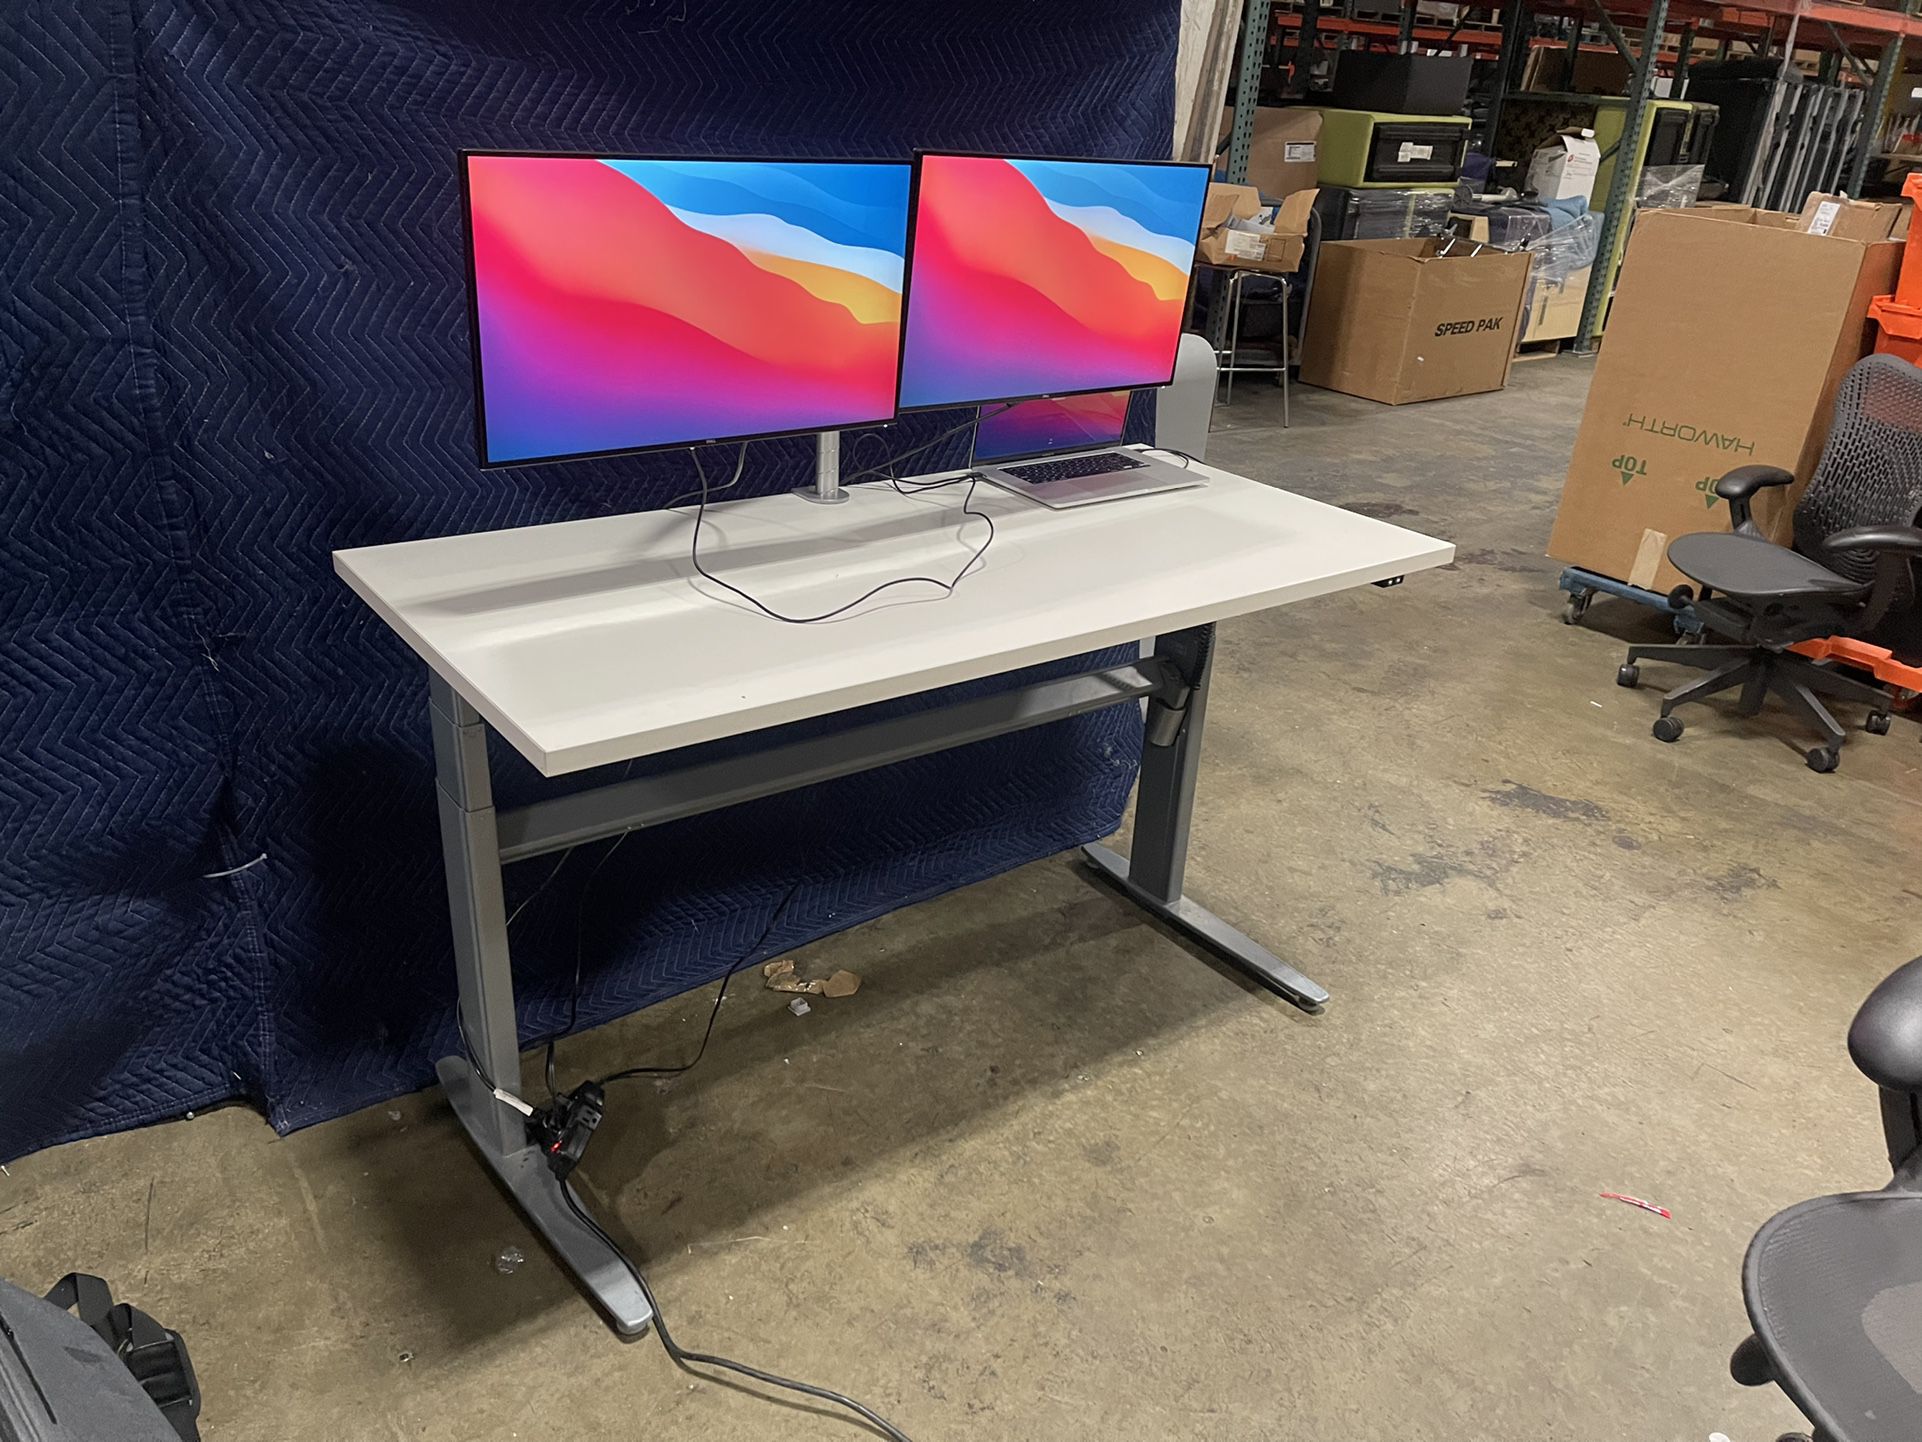 Standing Desk! 60x30 Electric Height Adjustable Table! We Also Have Ergonomic Chairs And Monitor Arms!